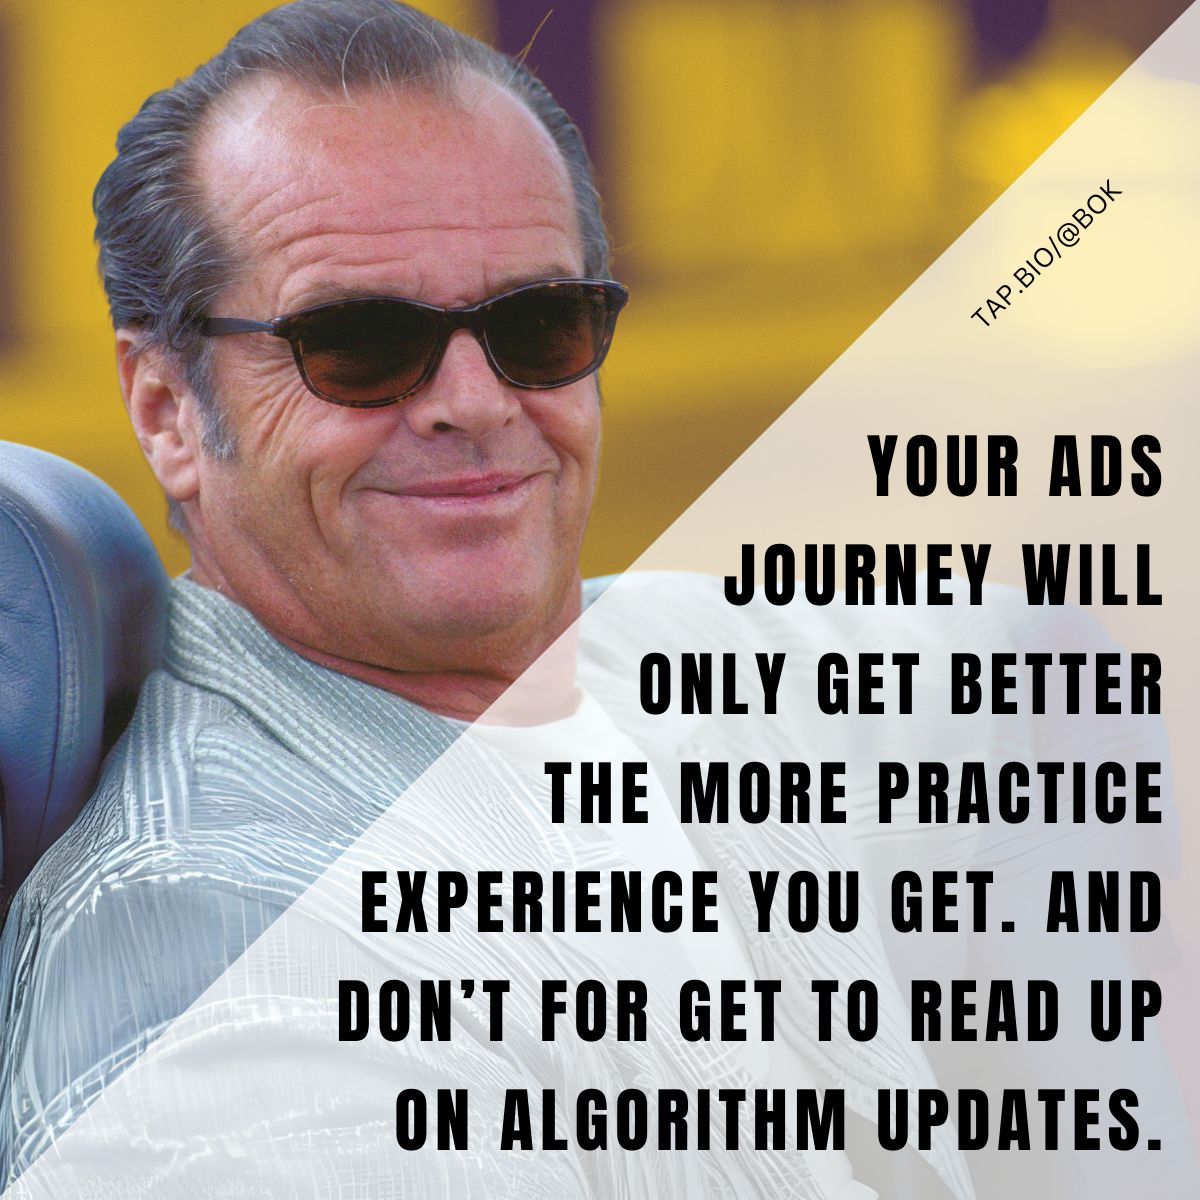 Experience is always great!

But understand that the algorithm keeps updating. So keep reading about algorithm updates, and talking with other media buyers. 

Happy weekend y'all!

#facebookads #facebookadstips #algorithmupdates #bakunawadigital